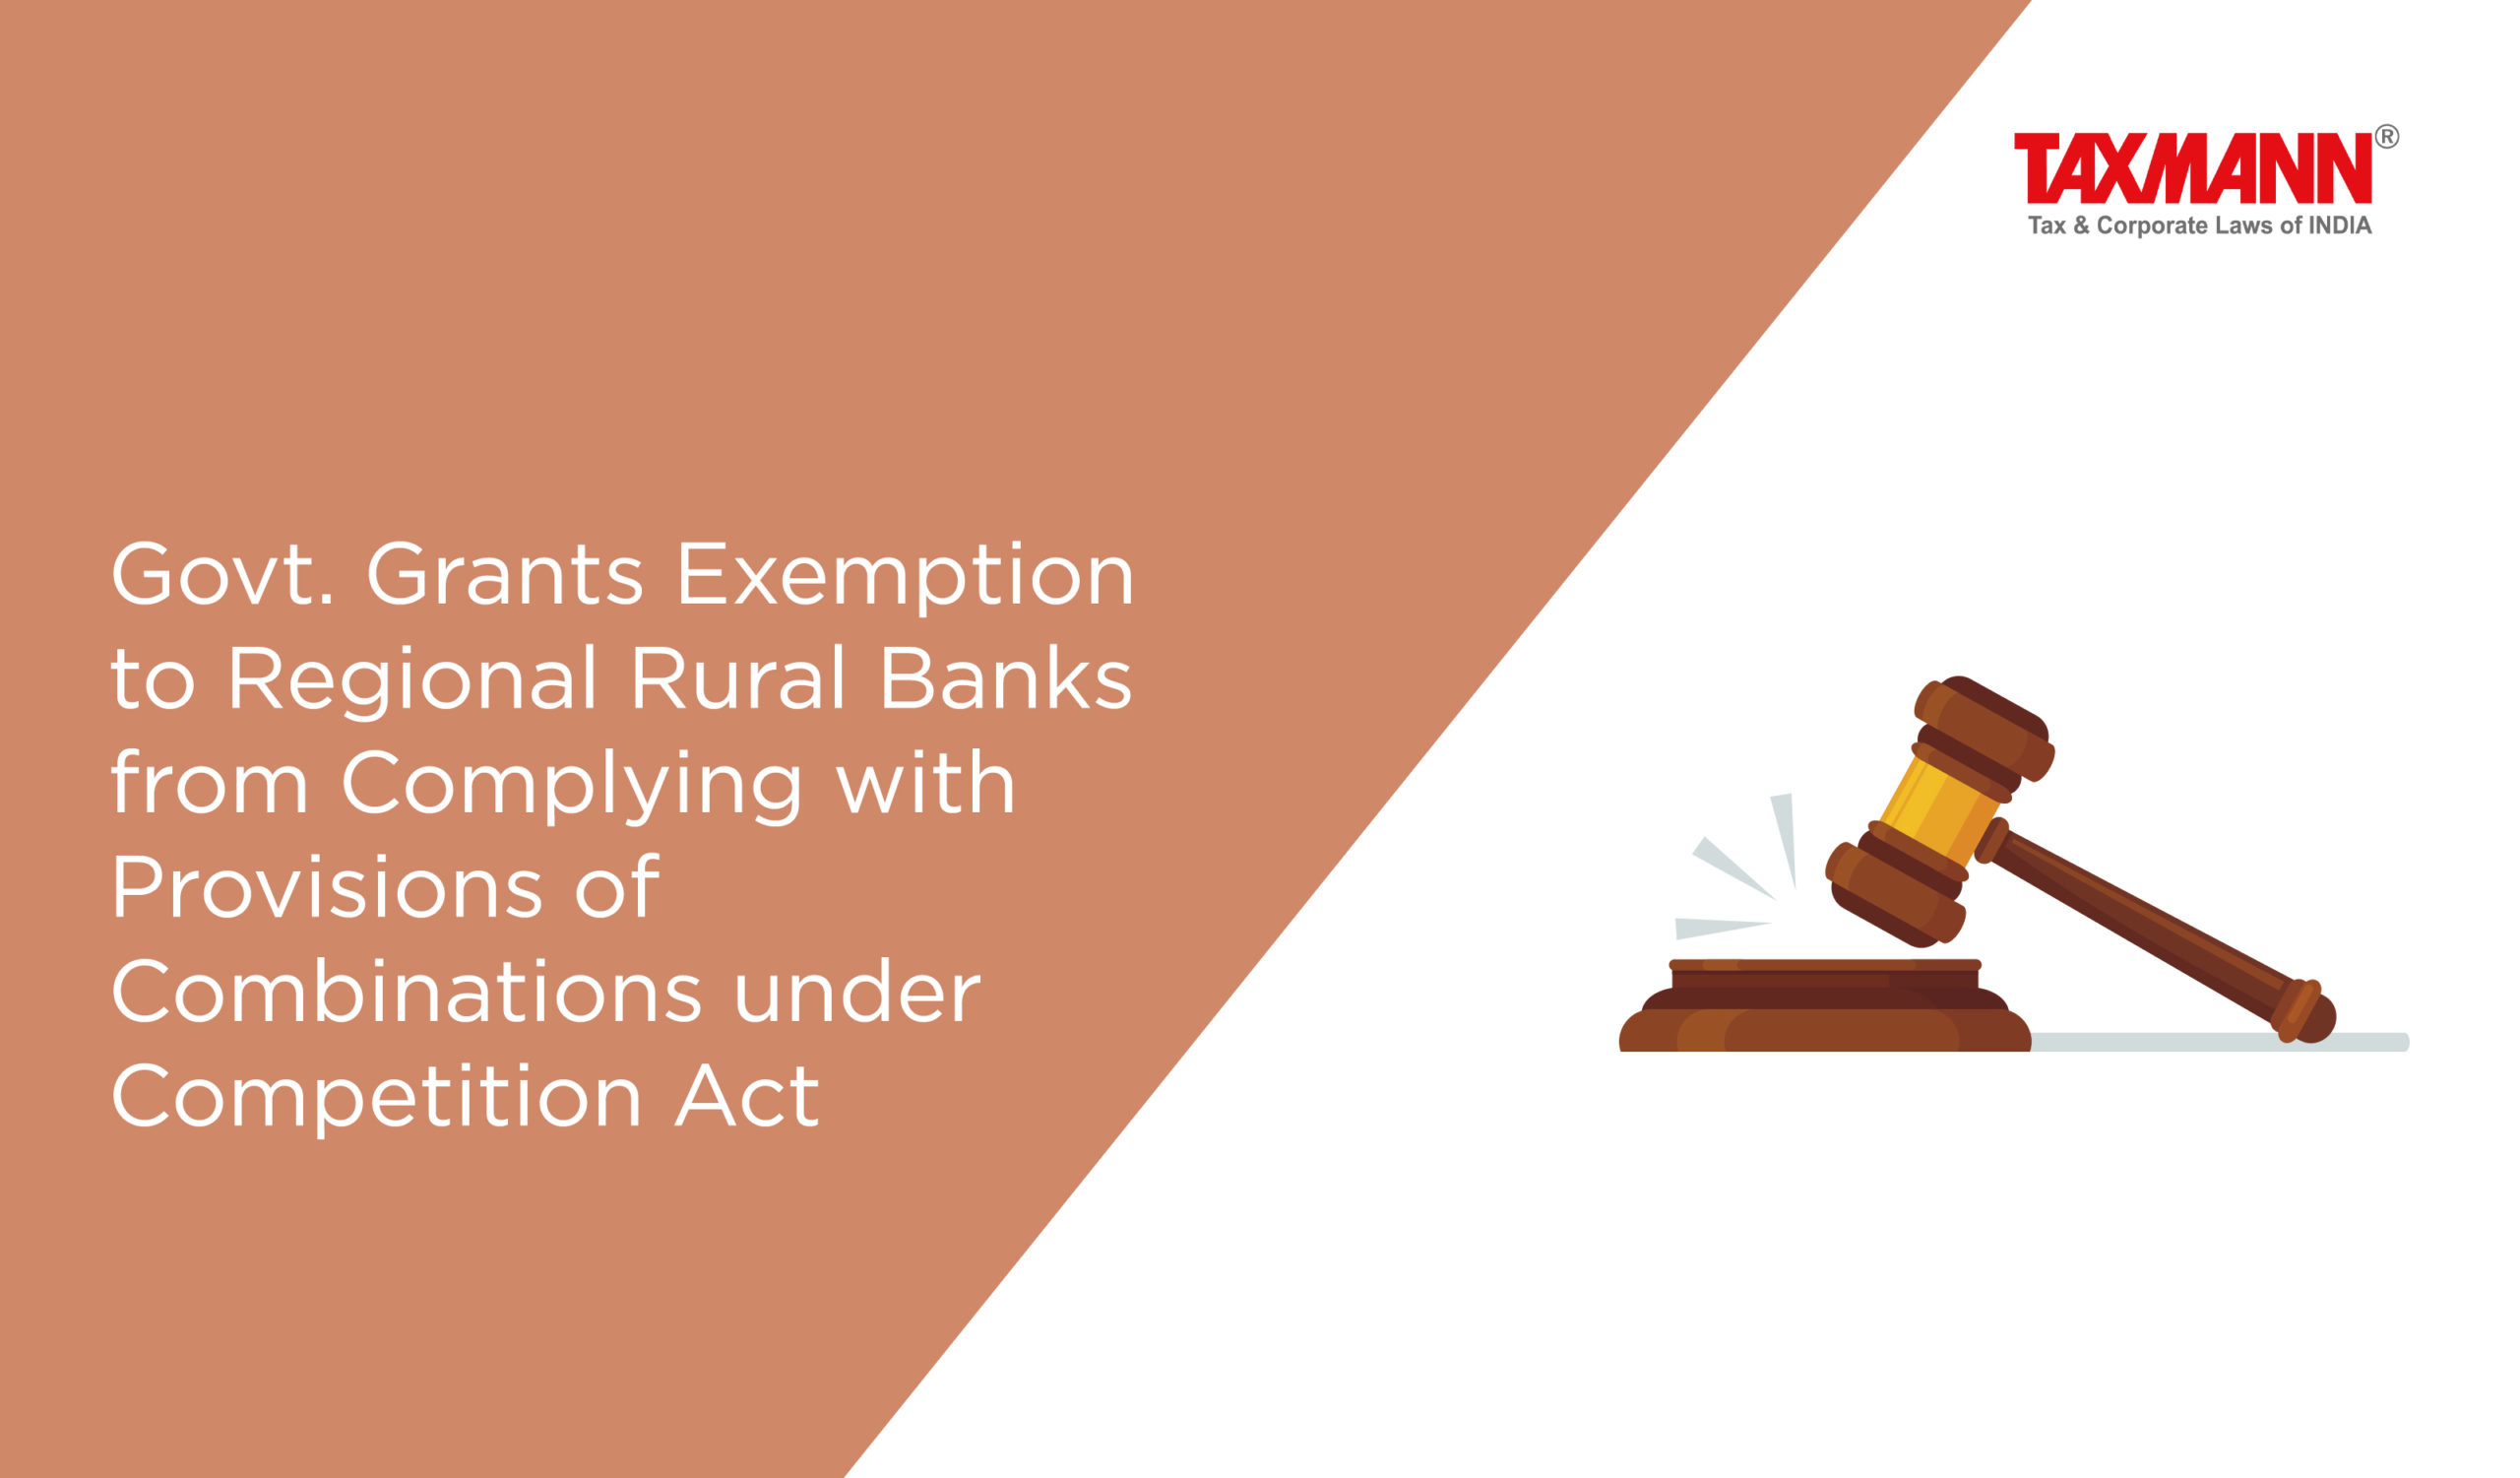 exemption to Regional Rural Banks under Competition Act